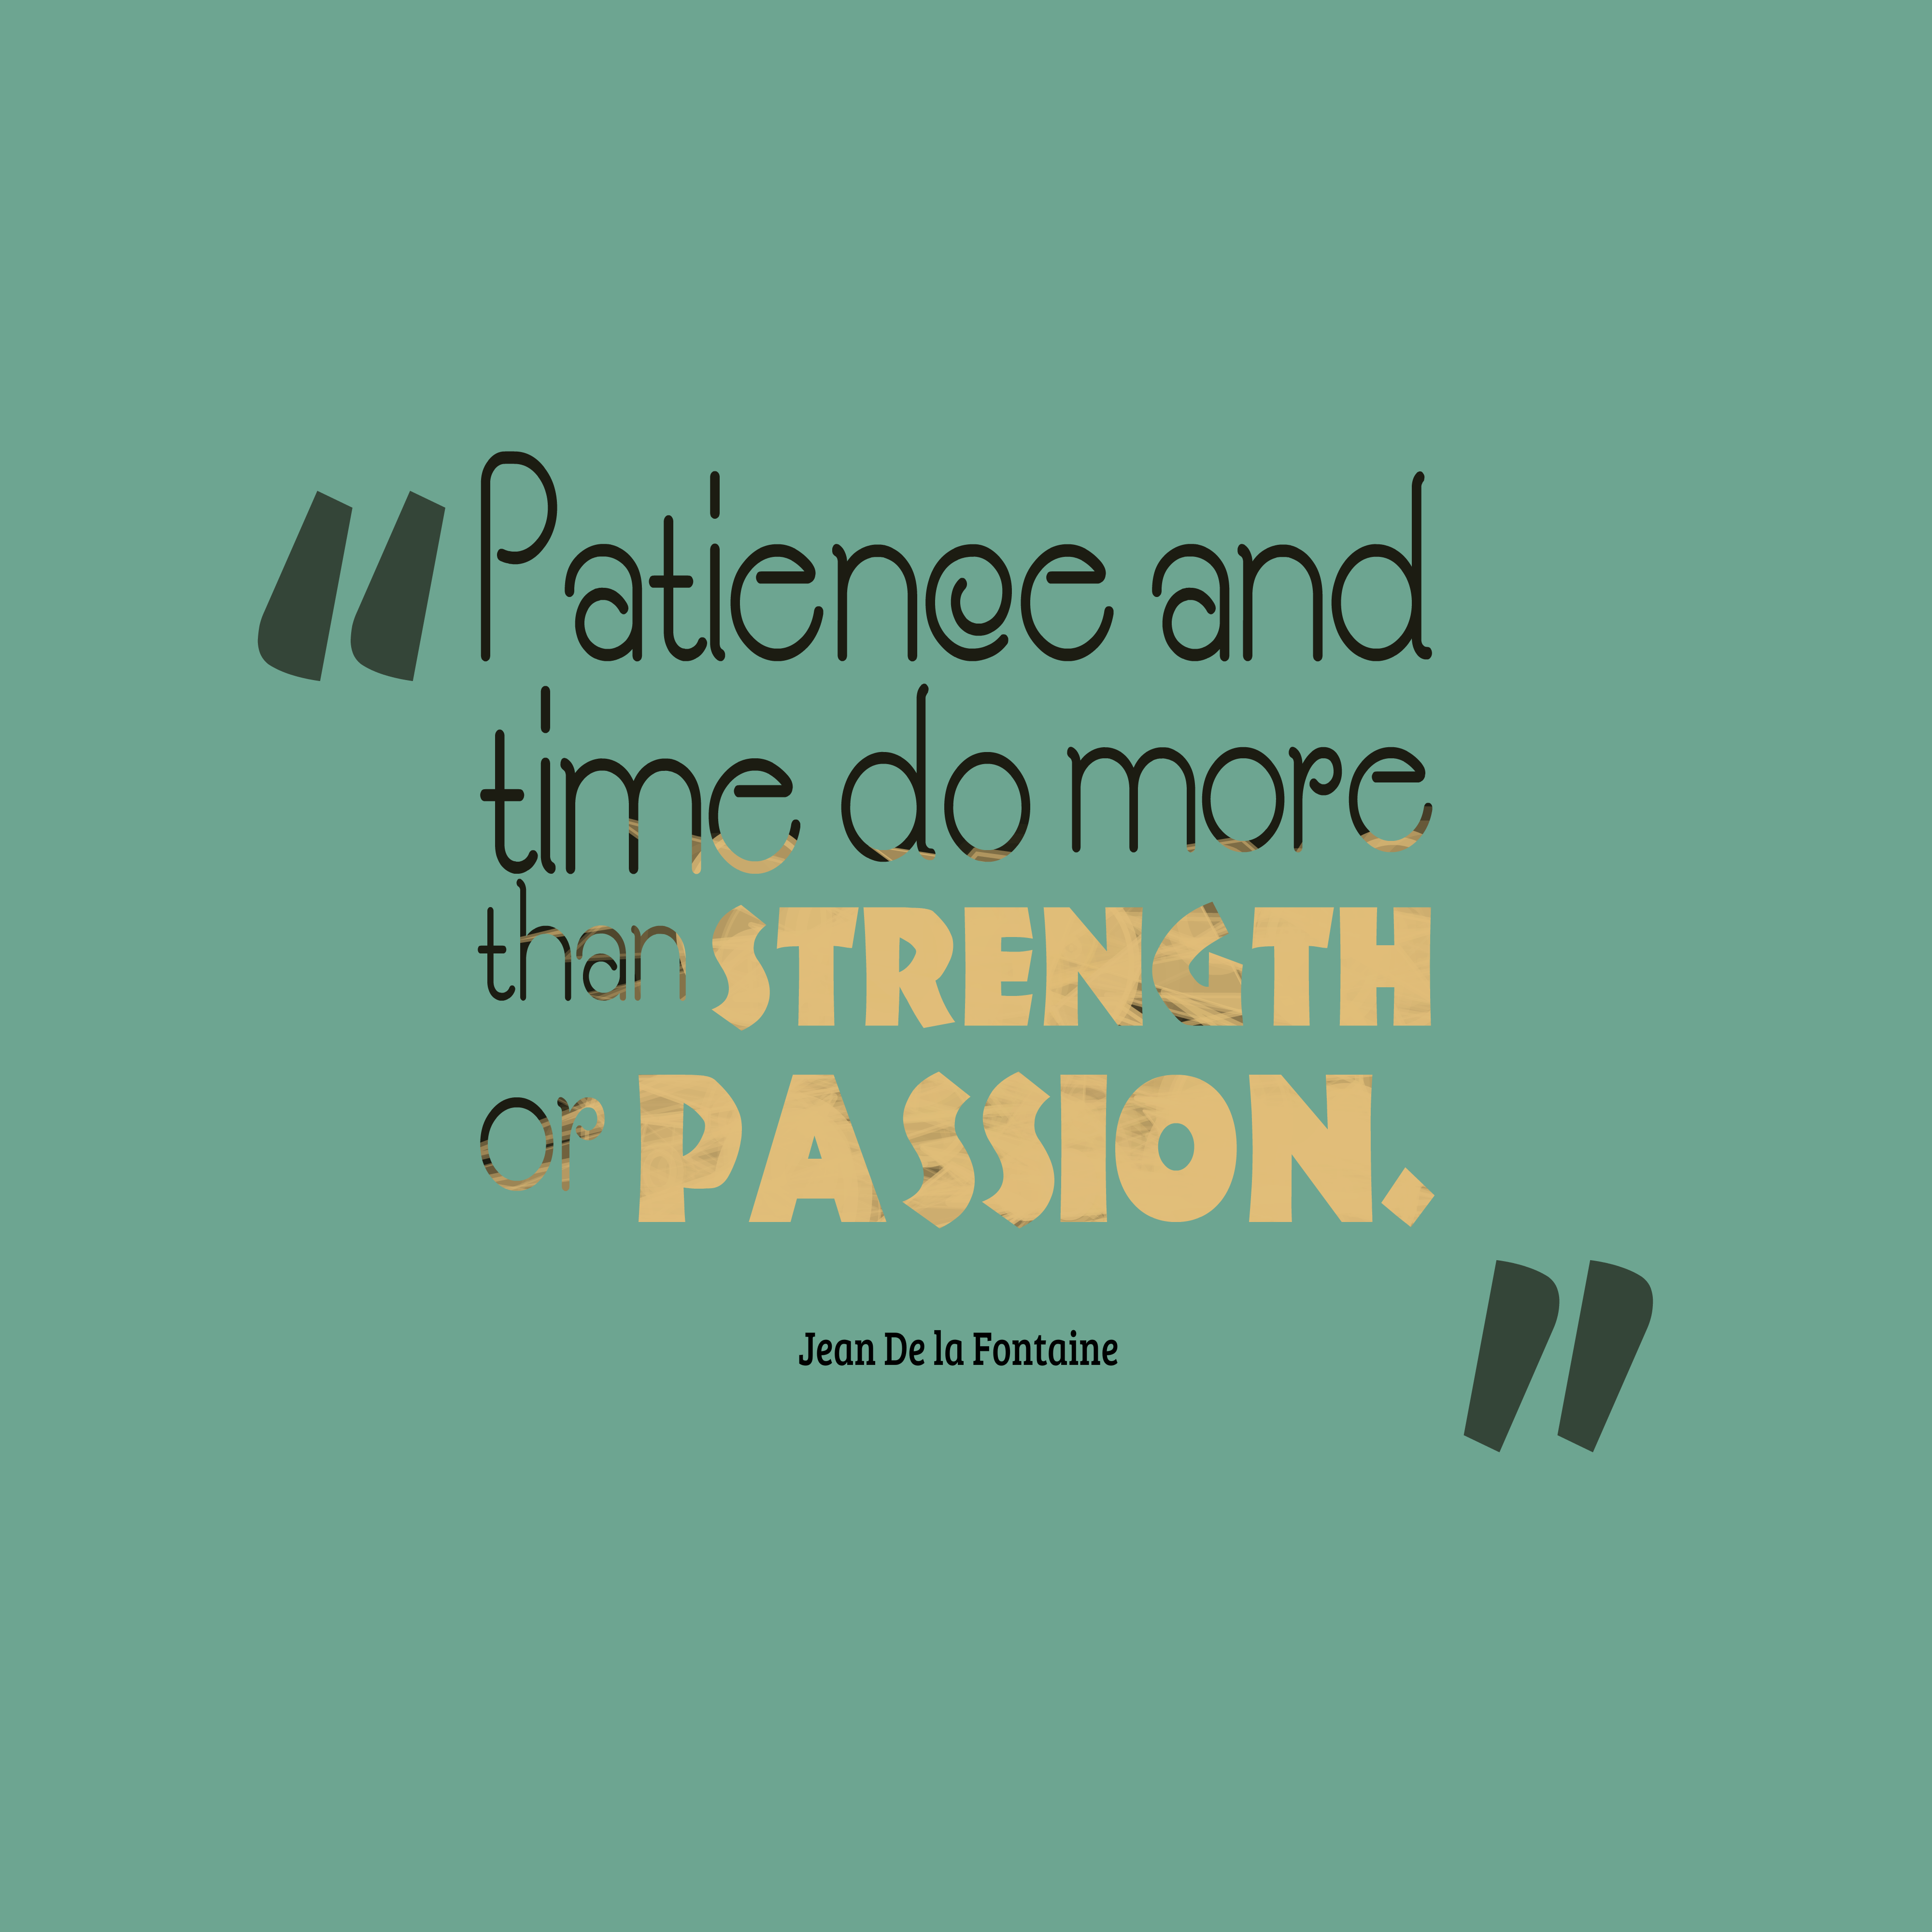 Patience and time do more than strength or passion. Jean de La Fontaine